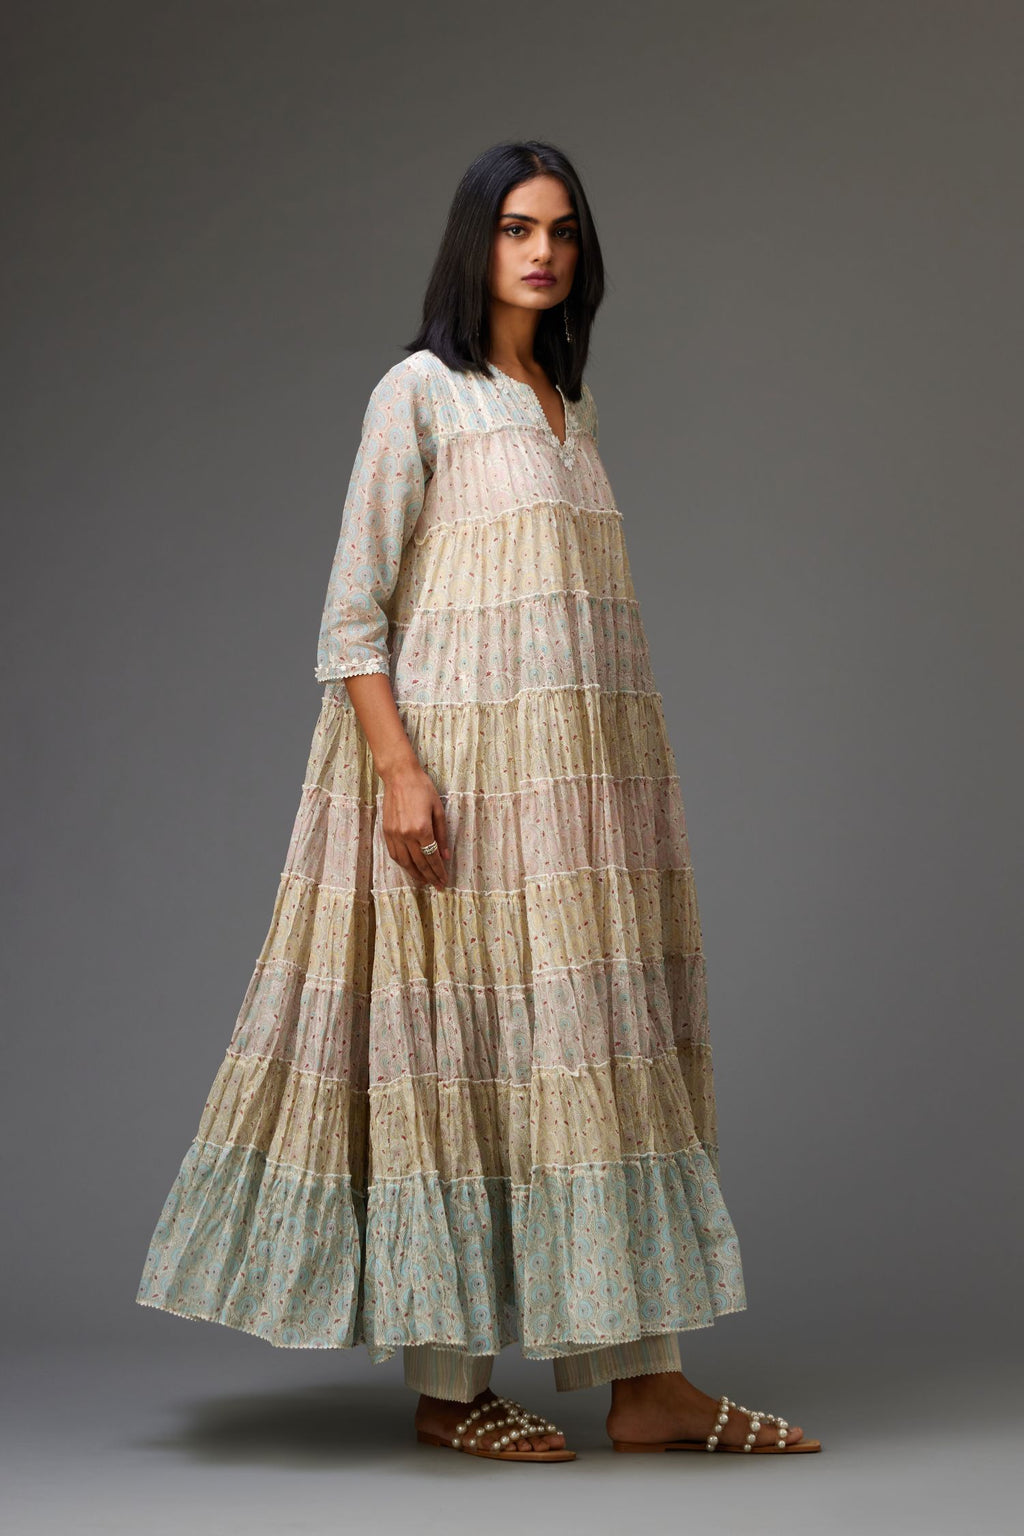 Mixed-print hand-block printed tiered kurta set with thread embroidery, highlighted with sequins.